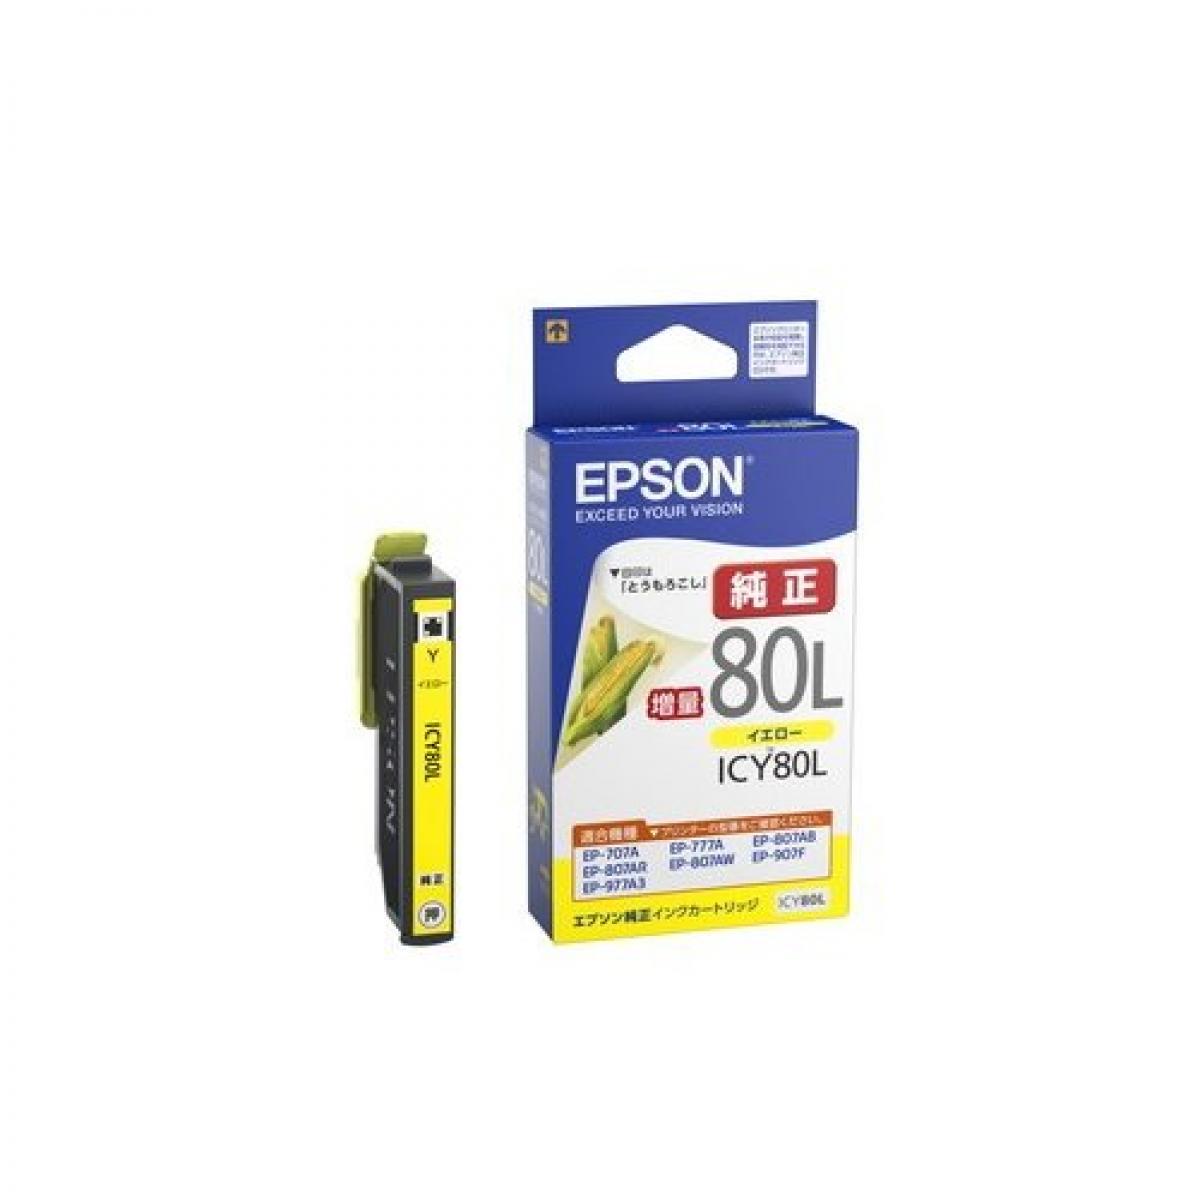 Gv\ (EPSON) CNJ[gbW ICY80L